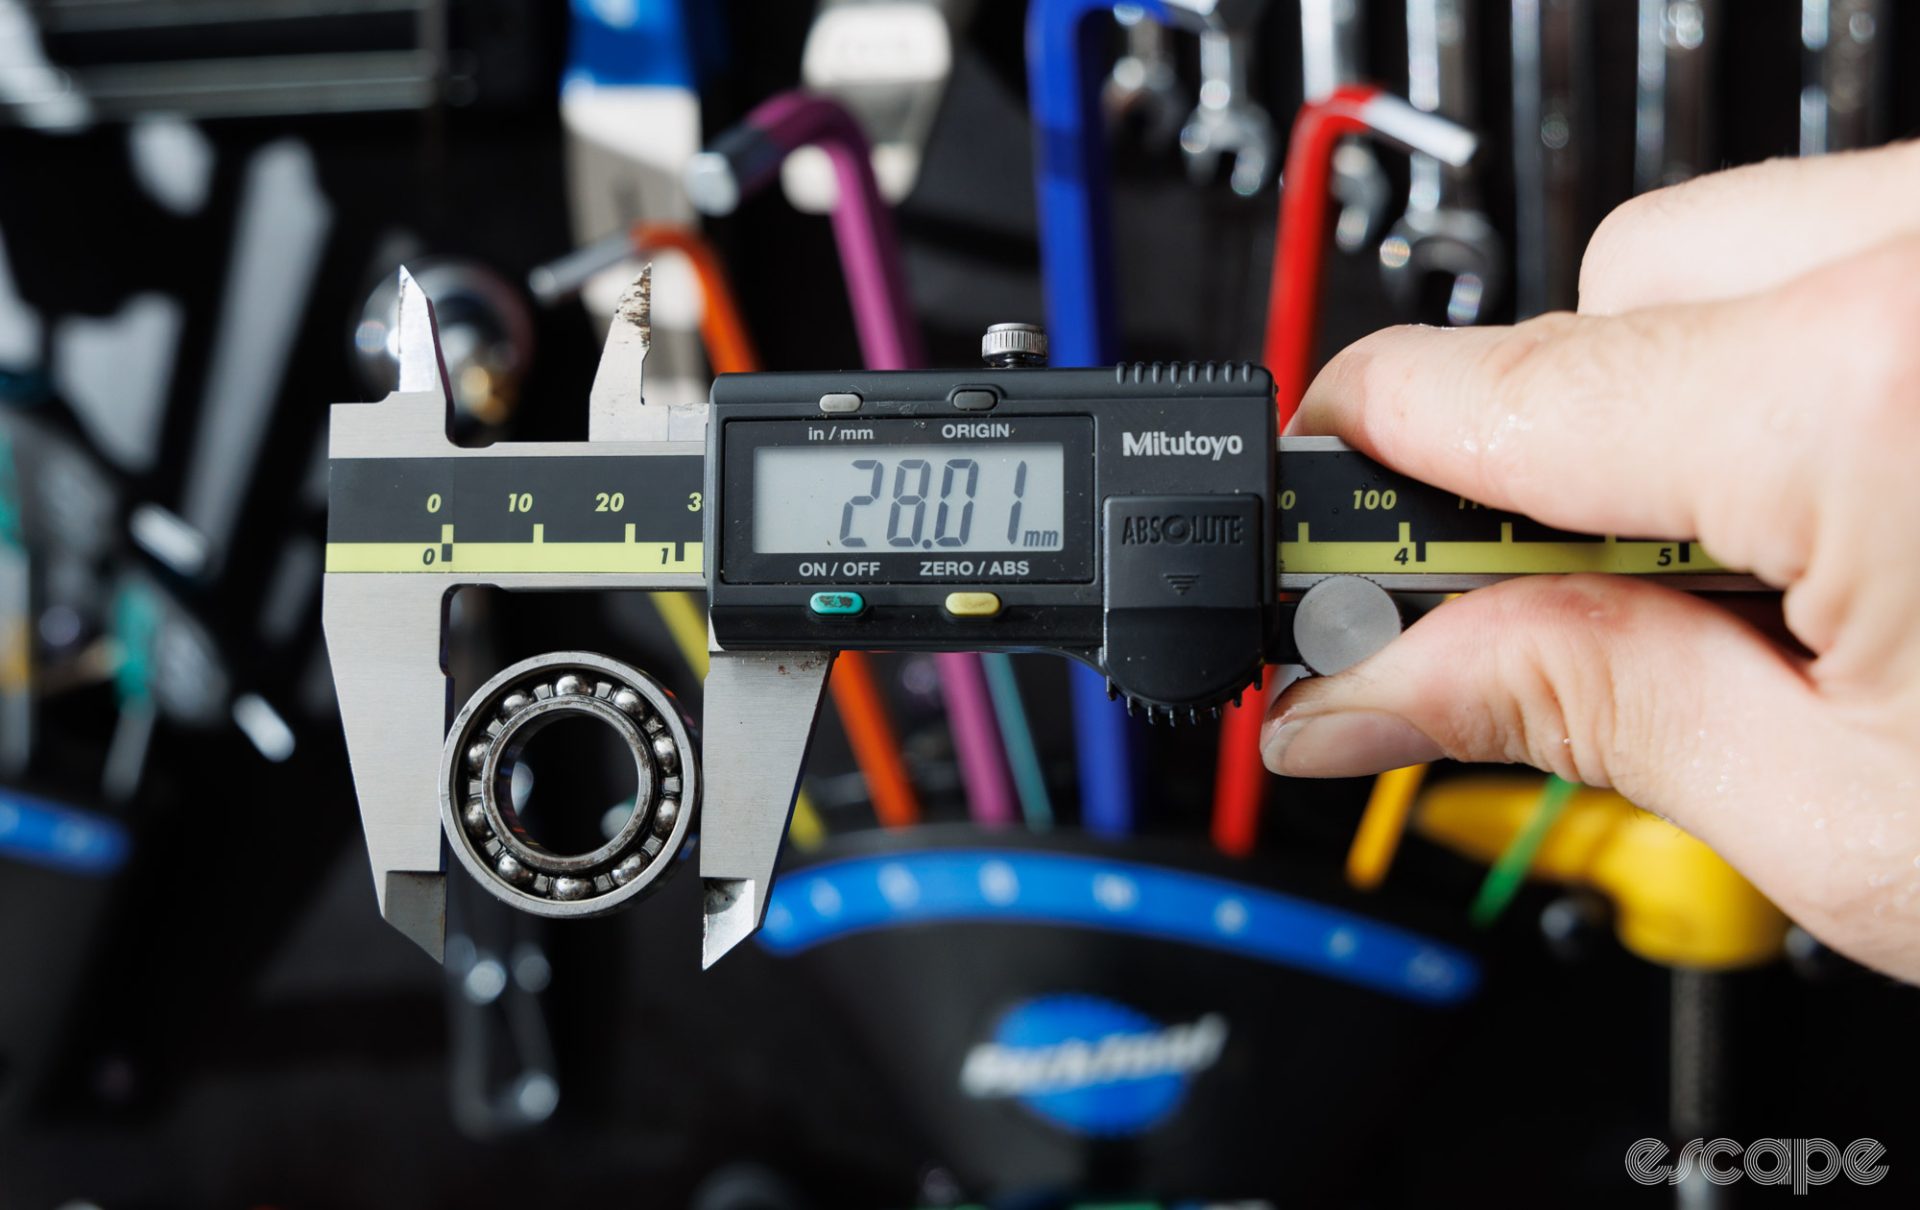 A digital caliper measures the outside diameter of a bearing. The calipers show 28.01 mm. 